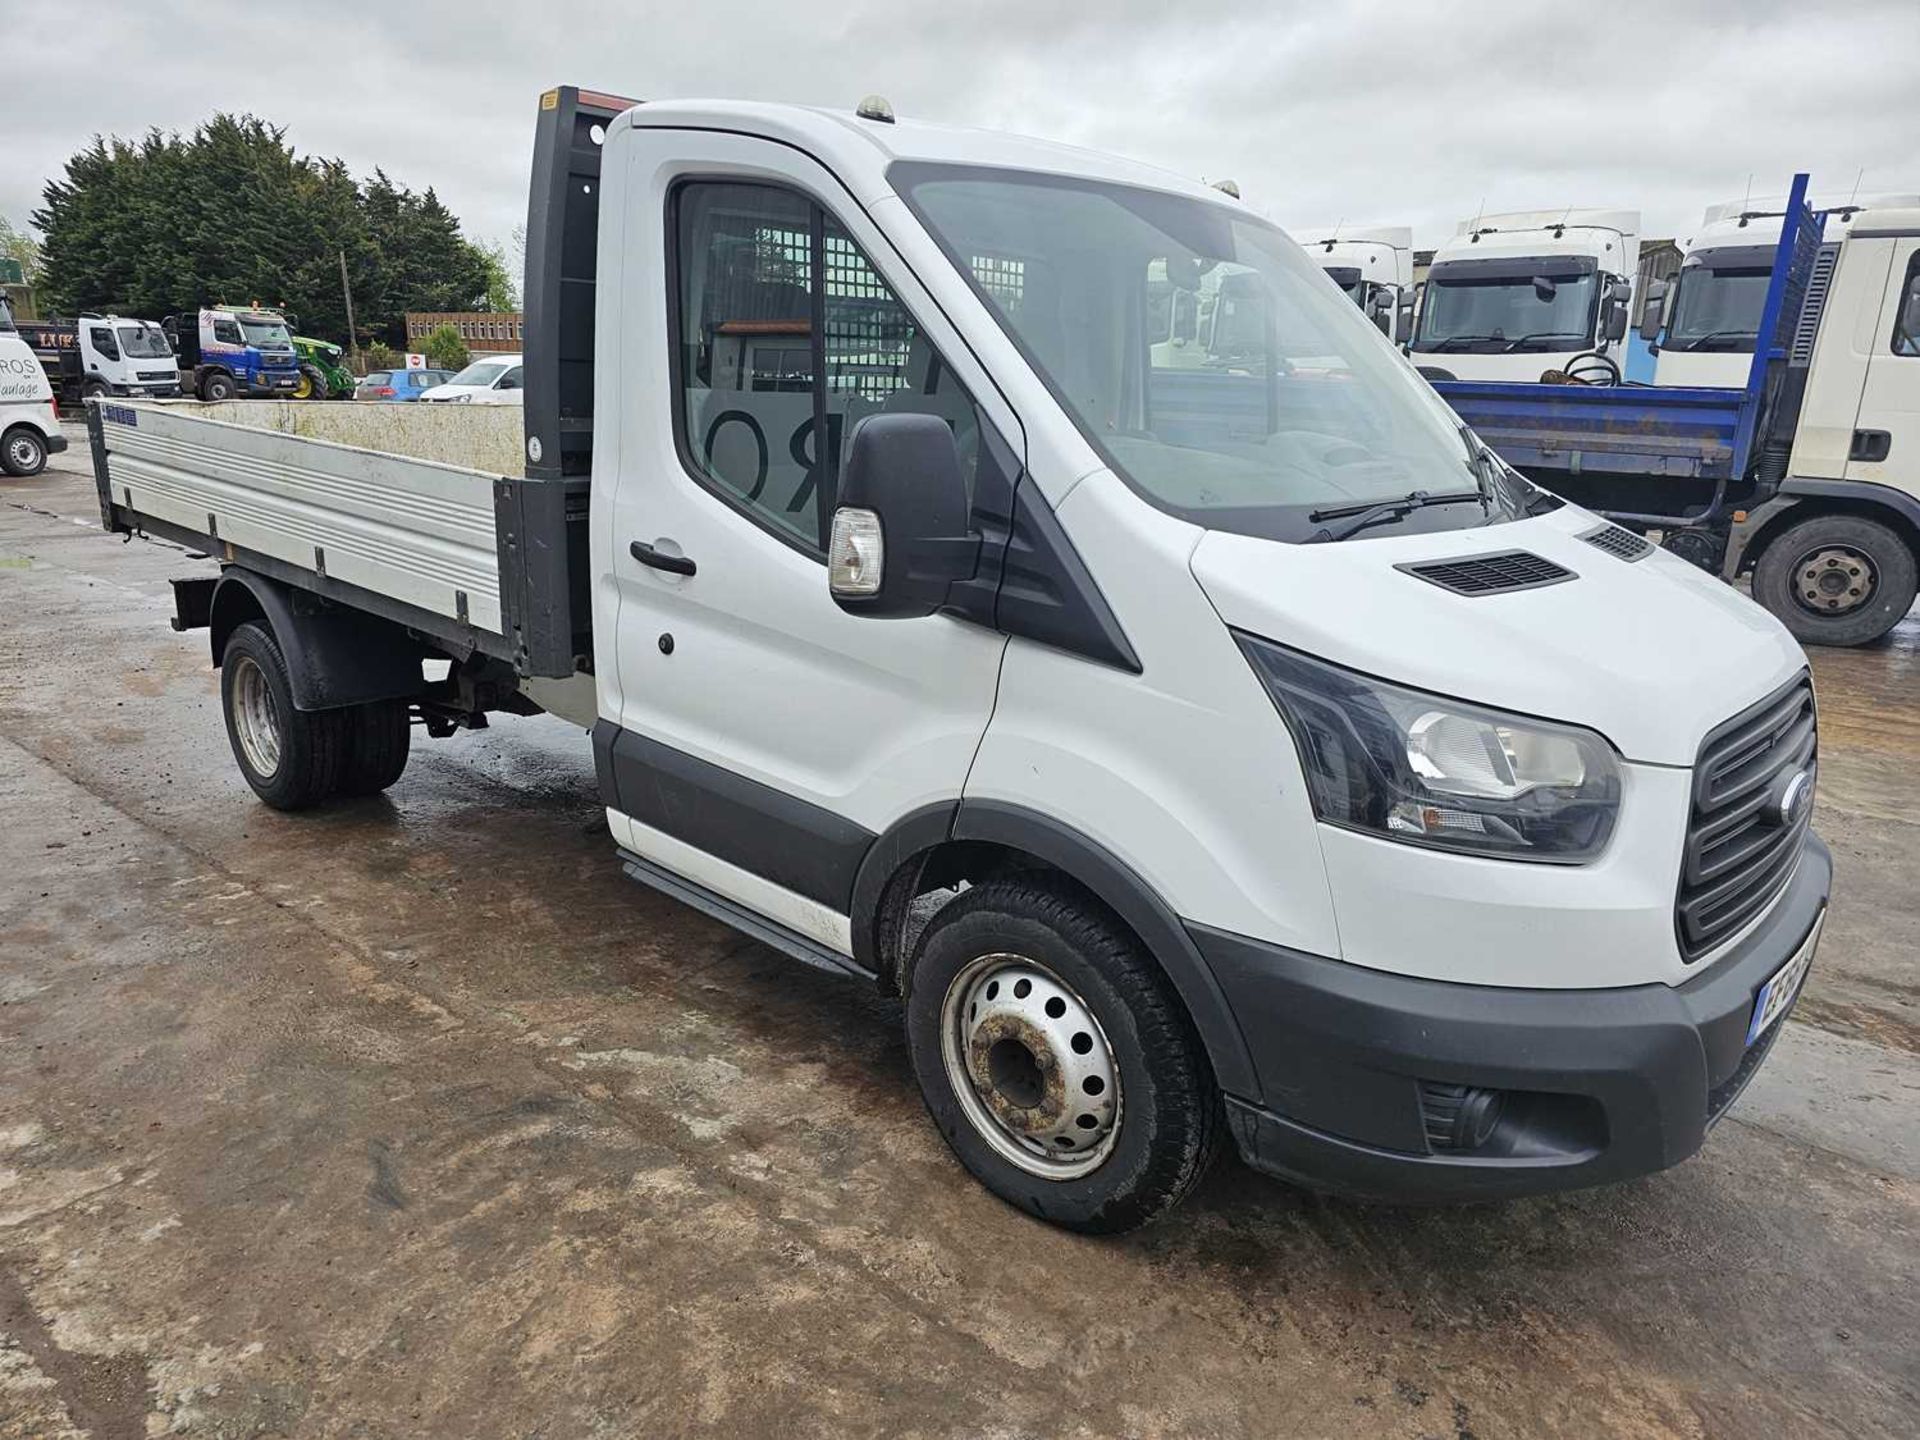 2016 Ford Transit 350 Ecoblue RWD 6 Speed Drop Side Tipper - Image 8 of 24